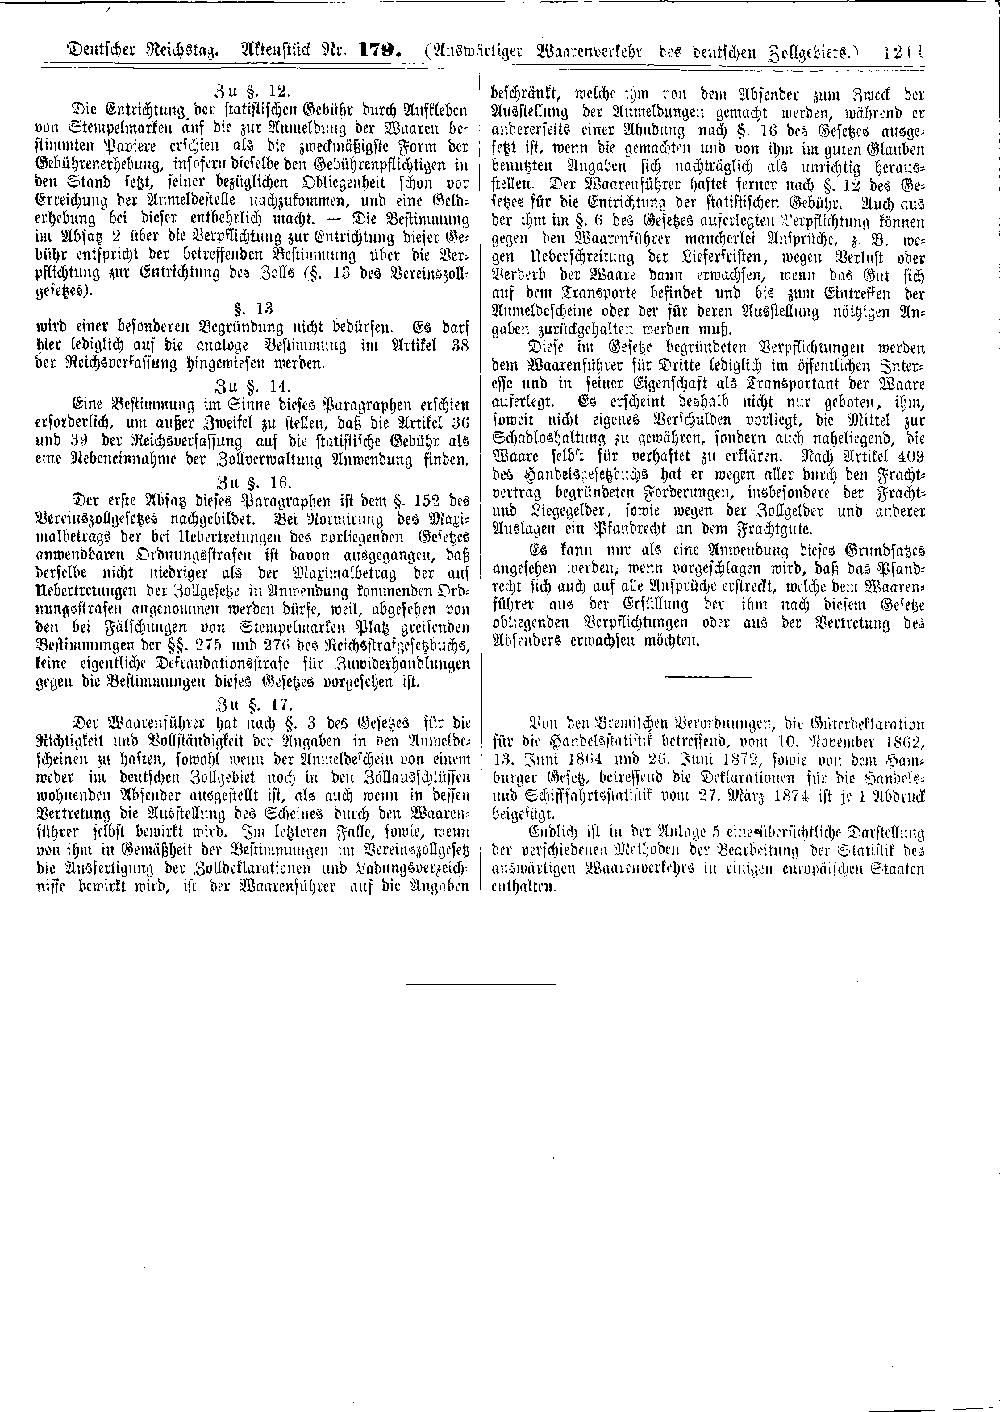 Scan of page 1211